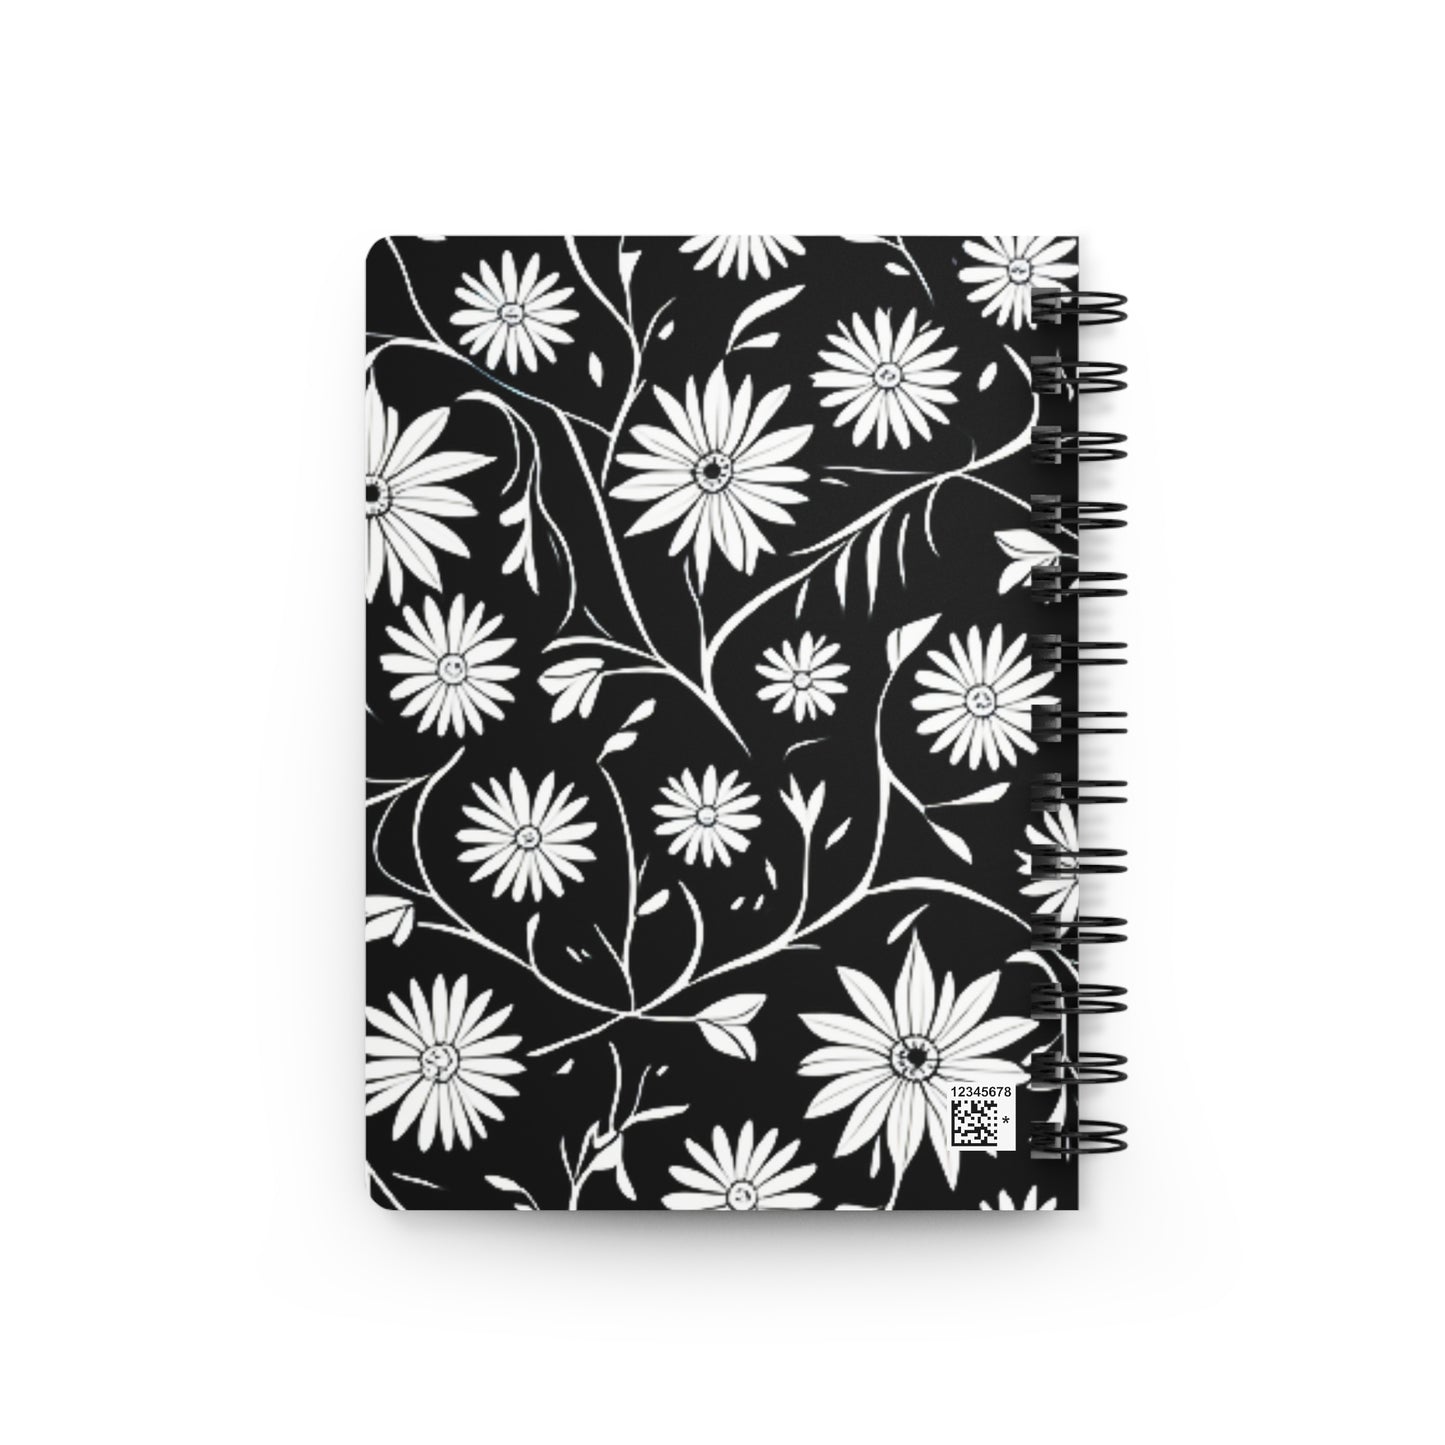 Field of Scandinavian Black and White Daisies 1970s Floral Pattern Writing Sketch Inspiration Spiral Bound Journal